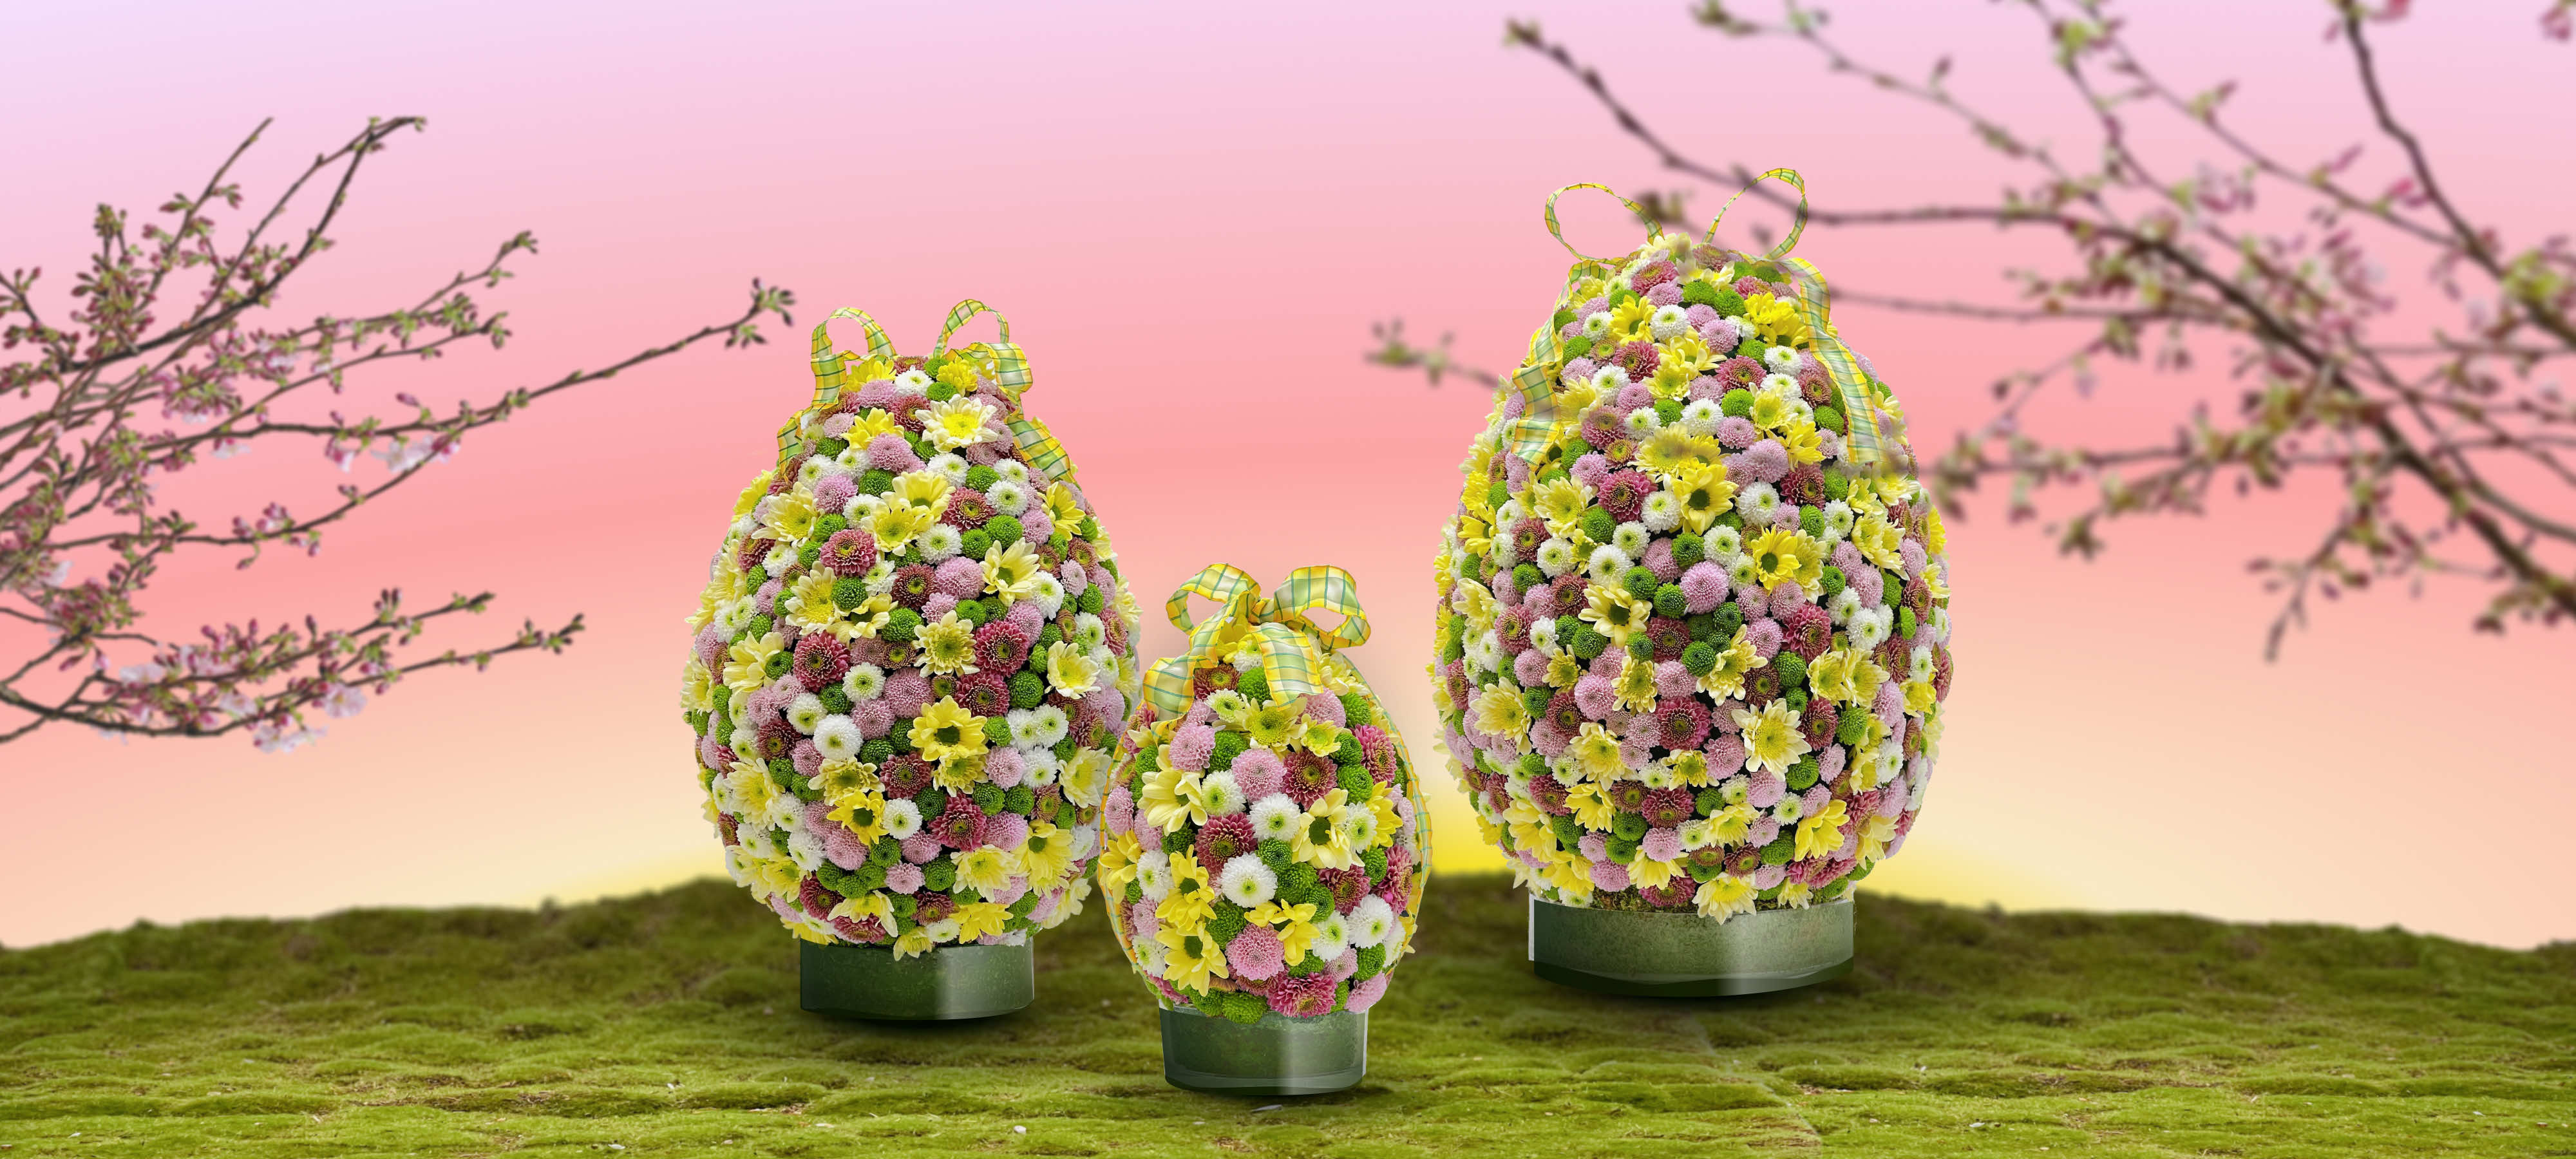 Decorative eggs studded with chrysanthemums